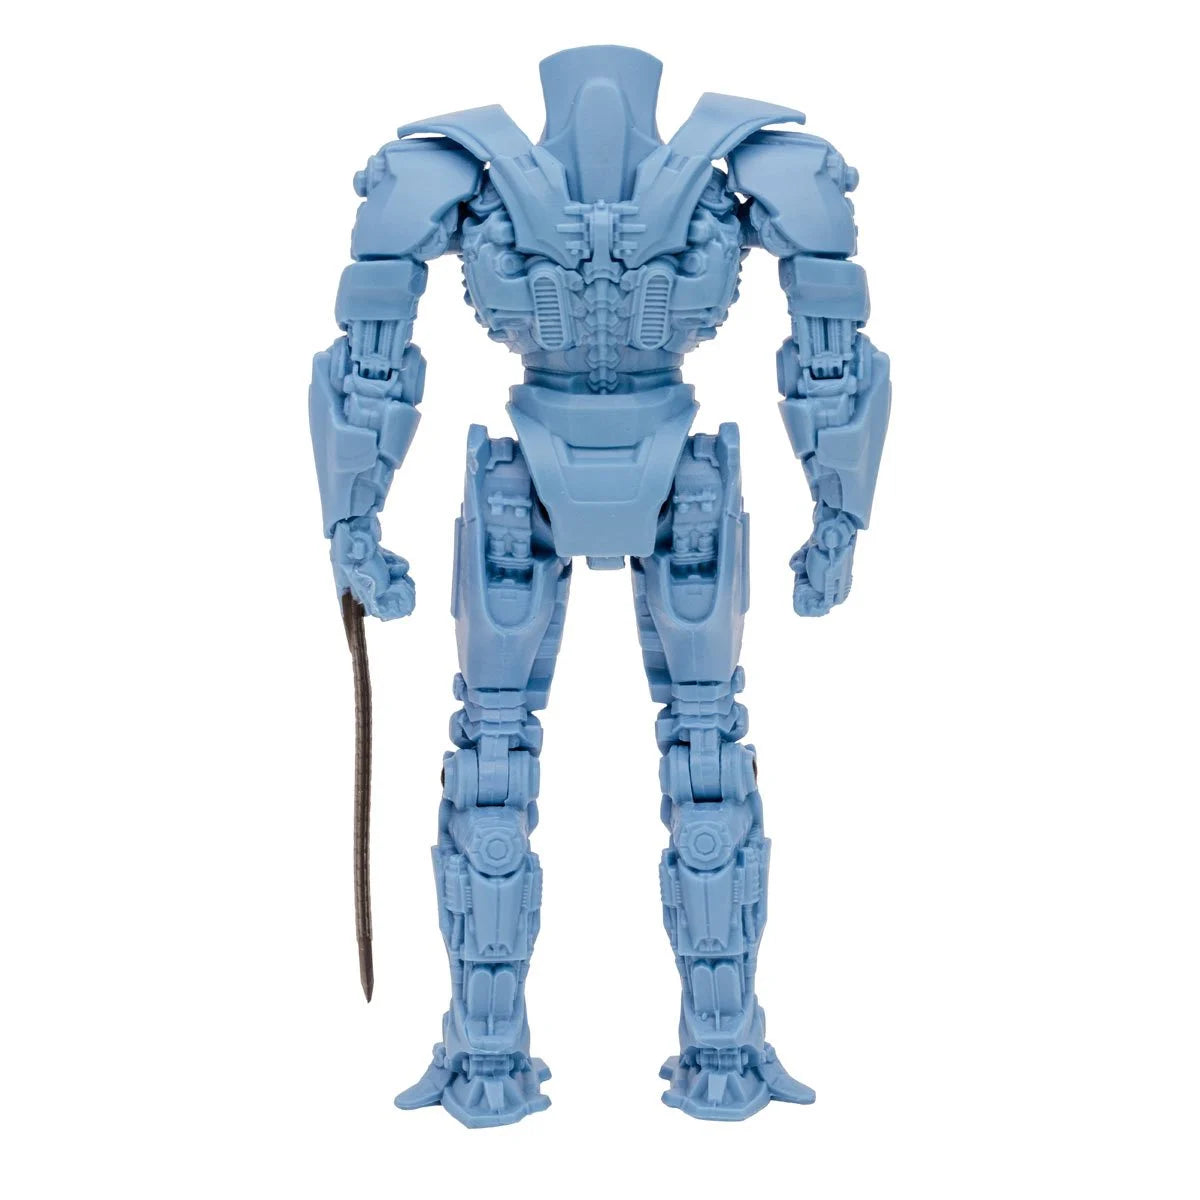 Pacific Rim Jaeger Wave 1 Gipsy Danger 4-Inch Scale Action Figure with Comic Book